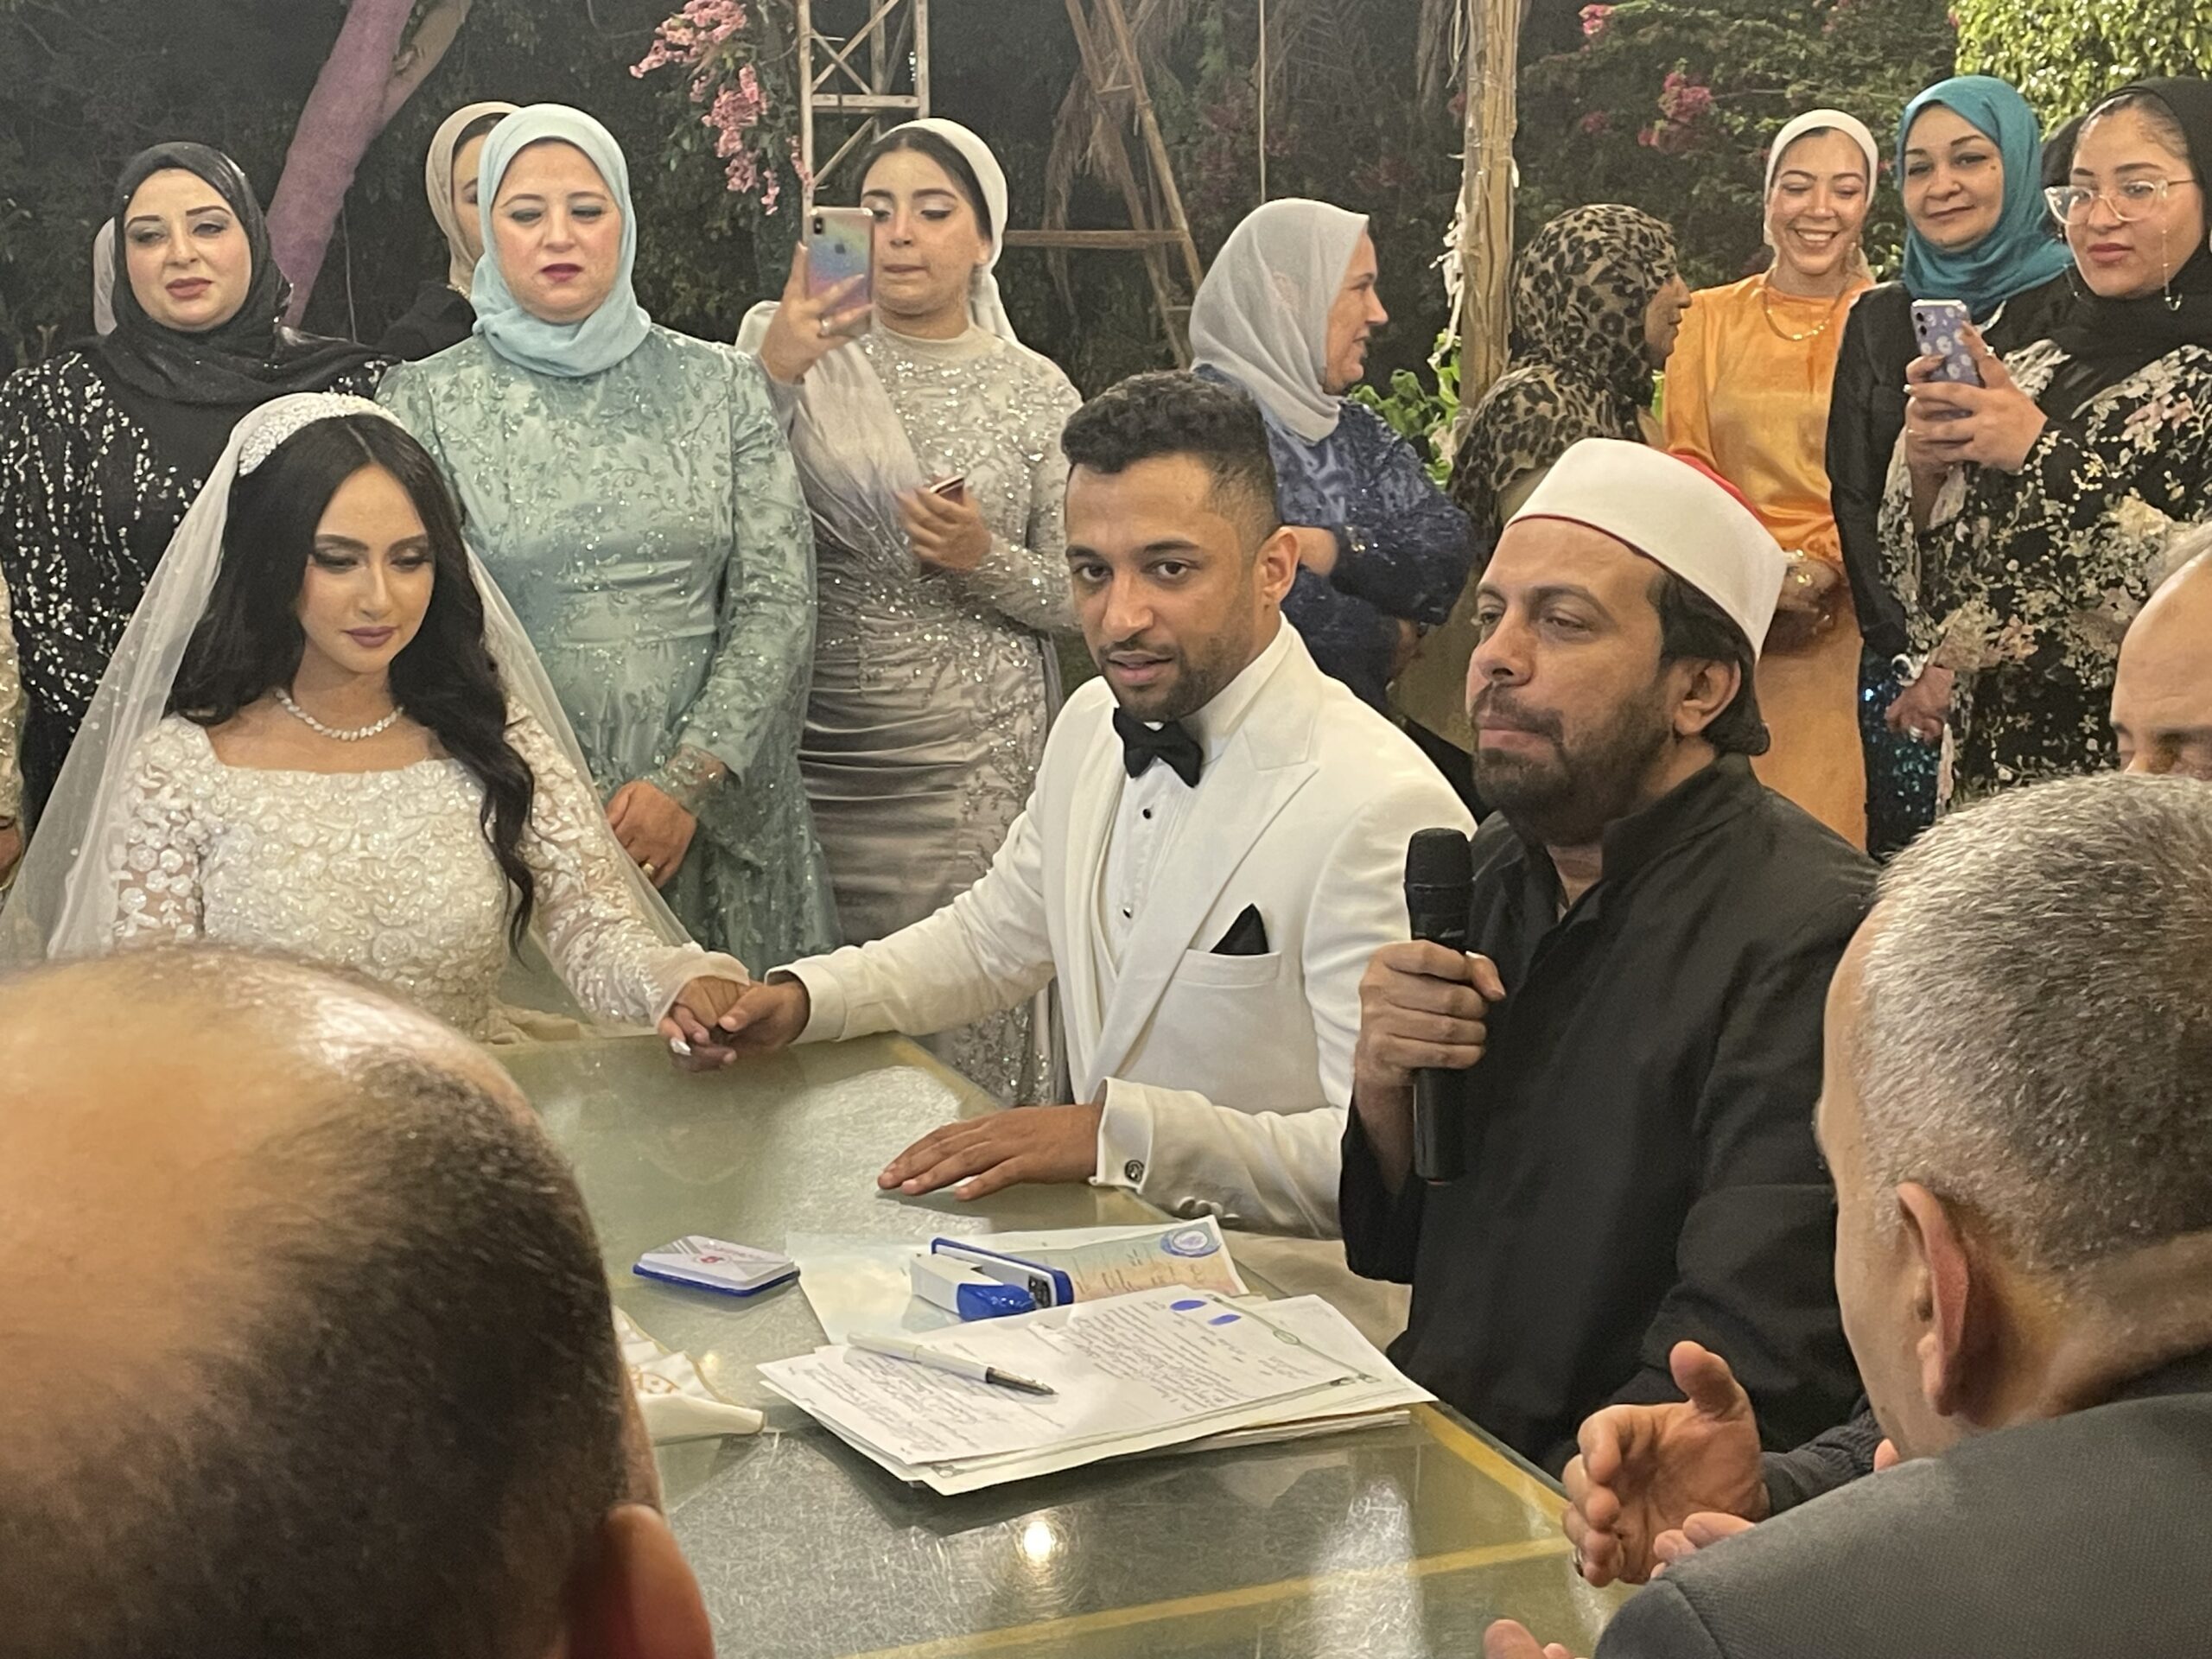 My time at an Egyptian wedding